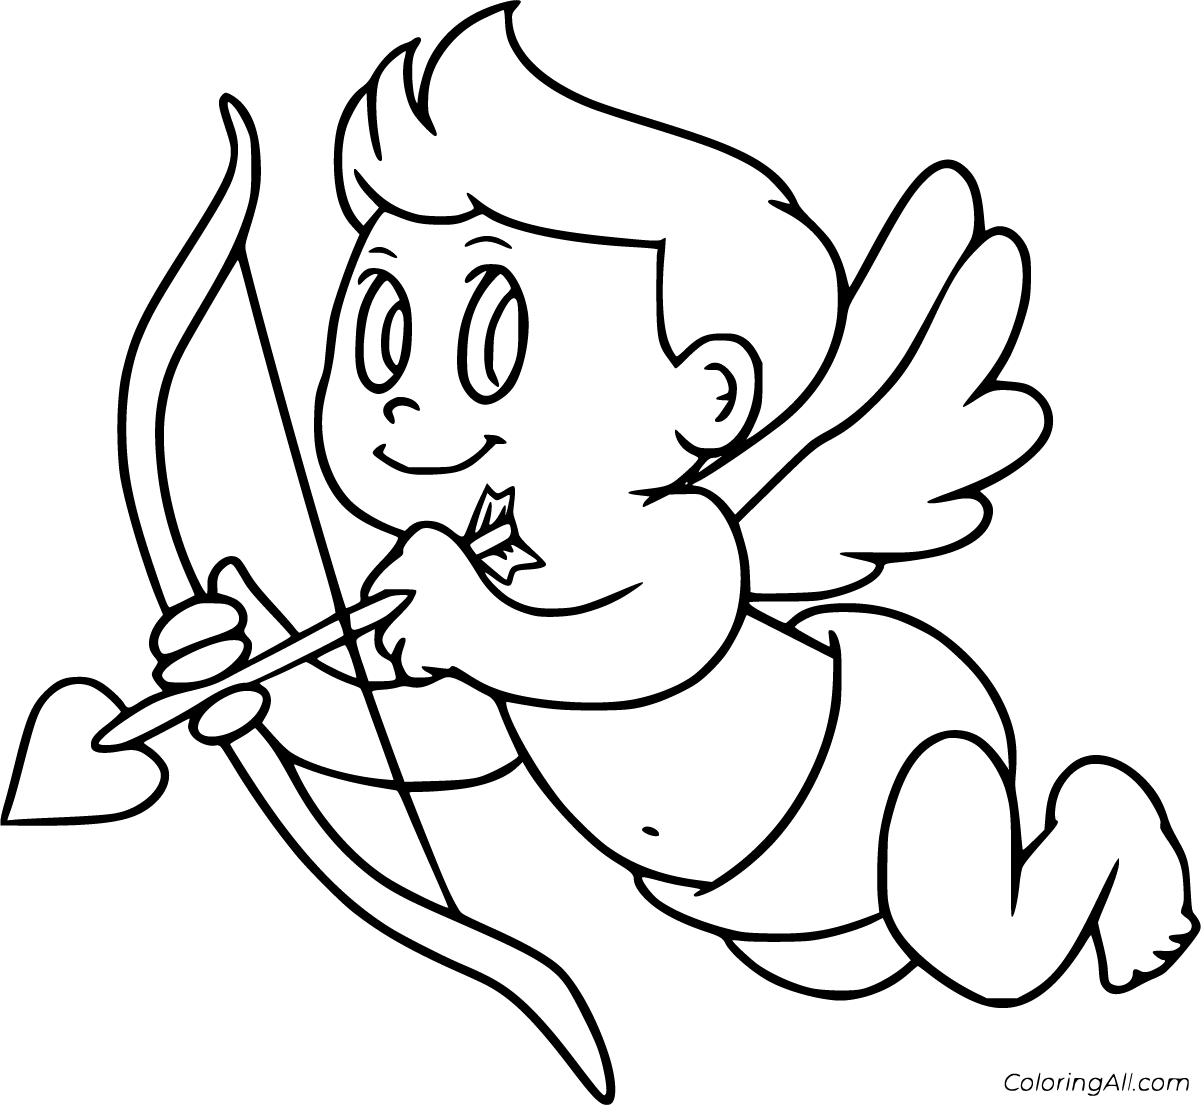 cupid-coloring-pages-printable